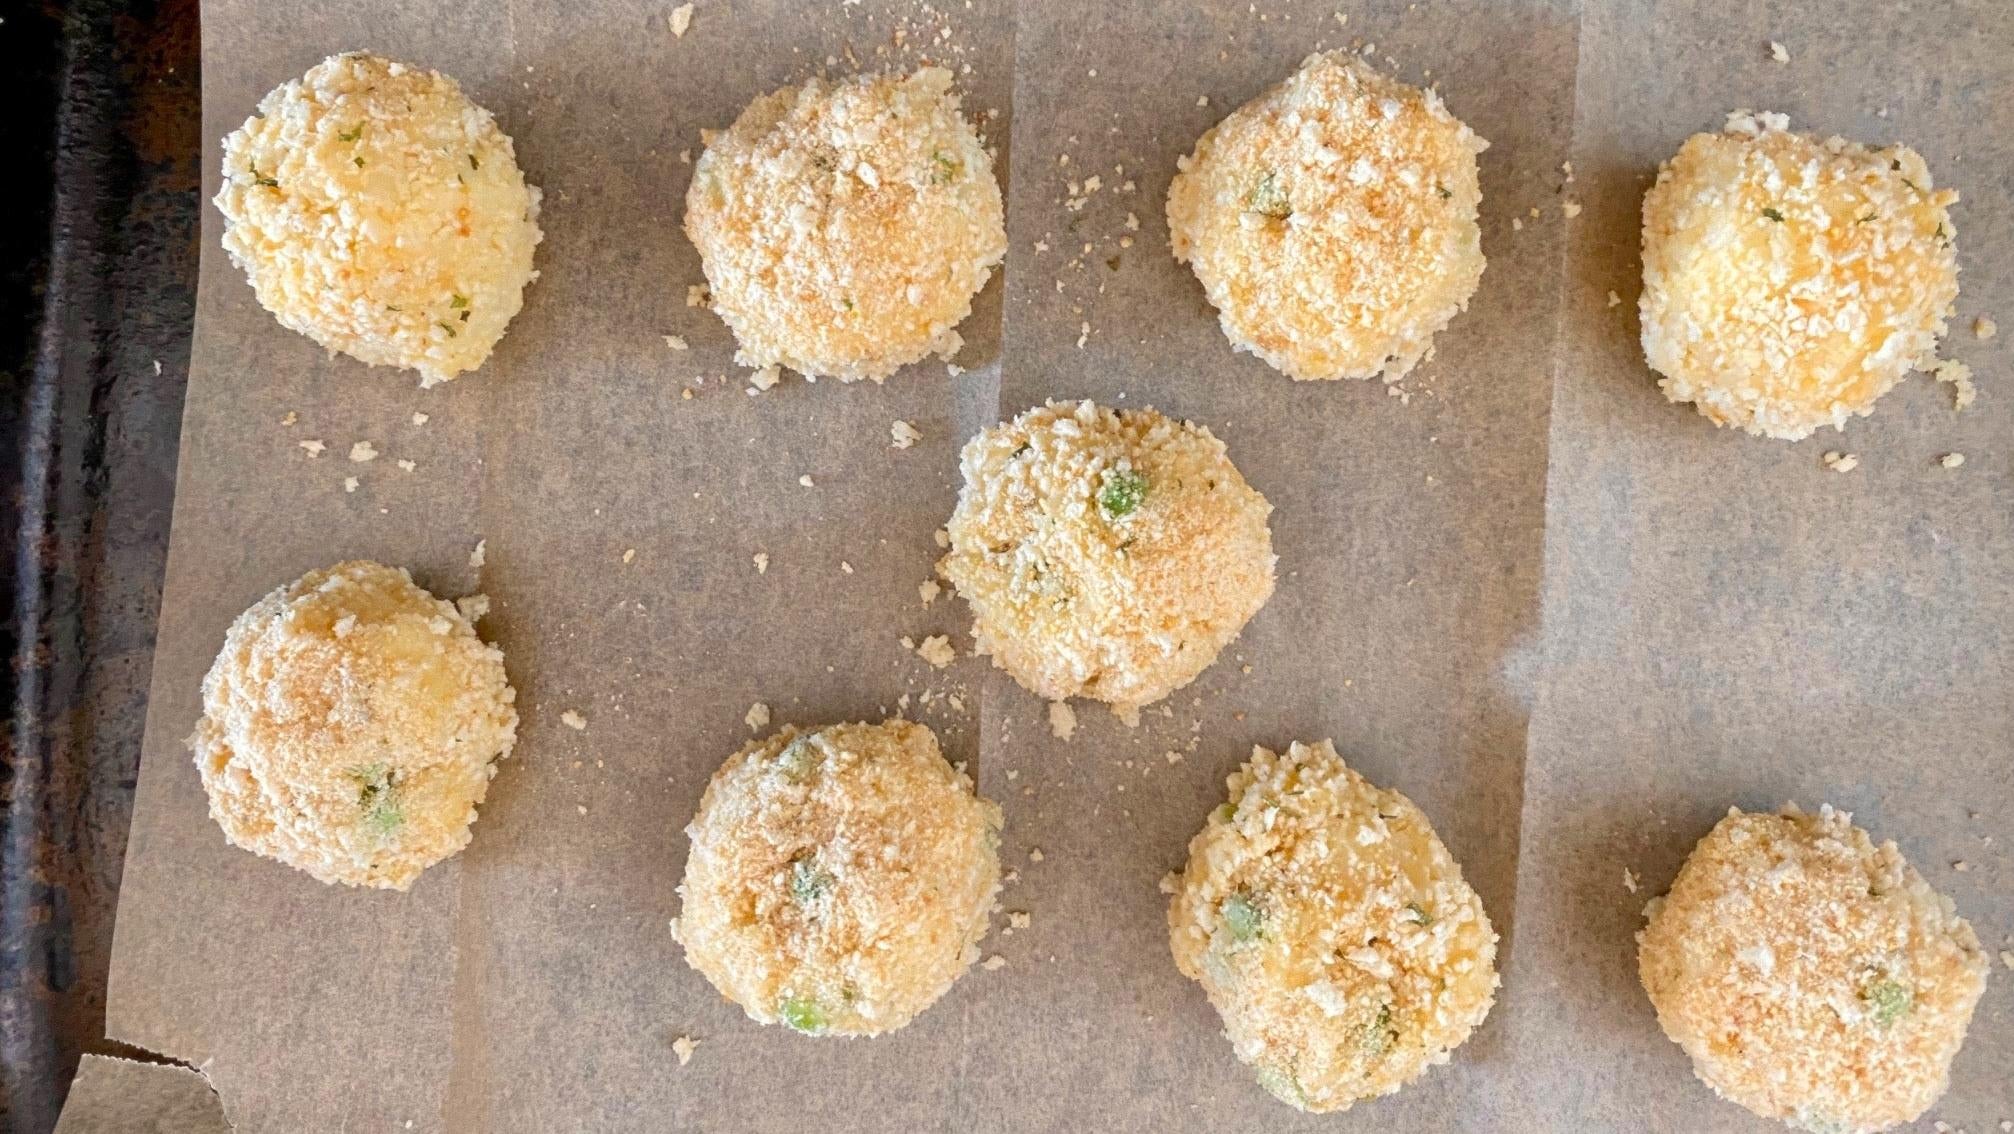 Cauliflower arancini rolled and breaded, ready to fry. (Photo: Allie Chanthorn Reinmann)